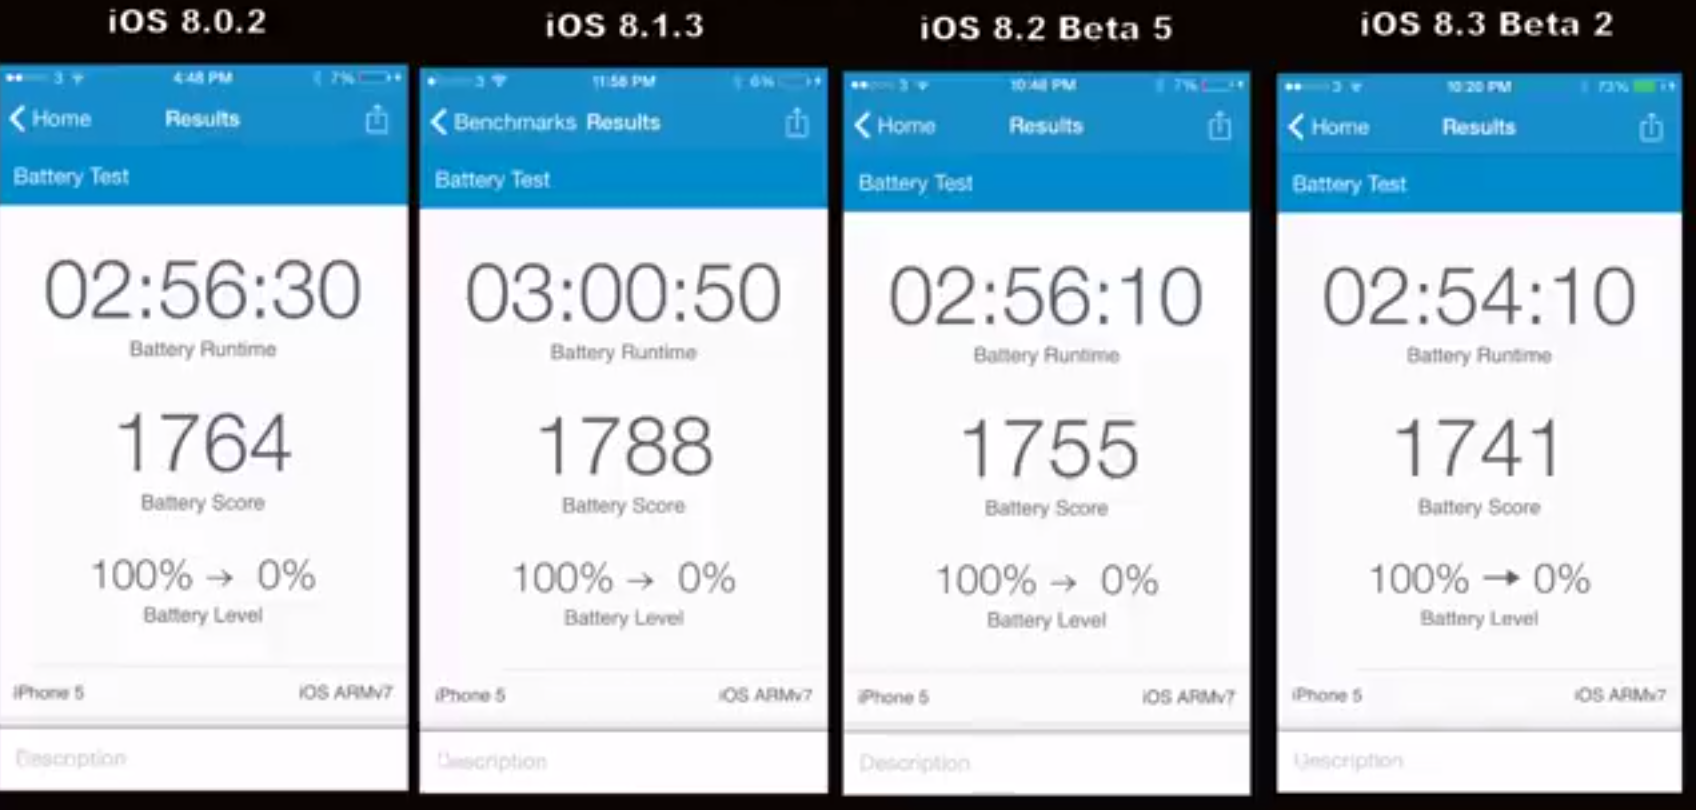 Iphone Battery Life Compared On Latest Ios 8 Betas Video 9to5mac